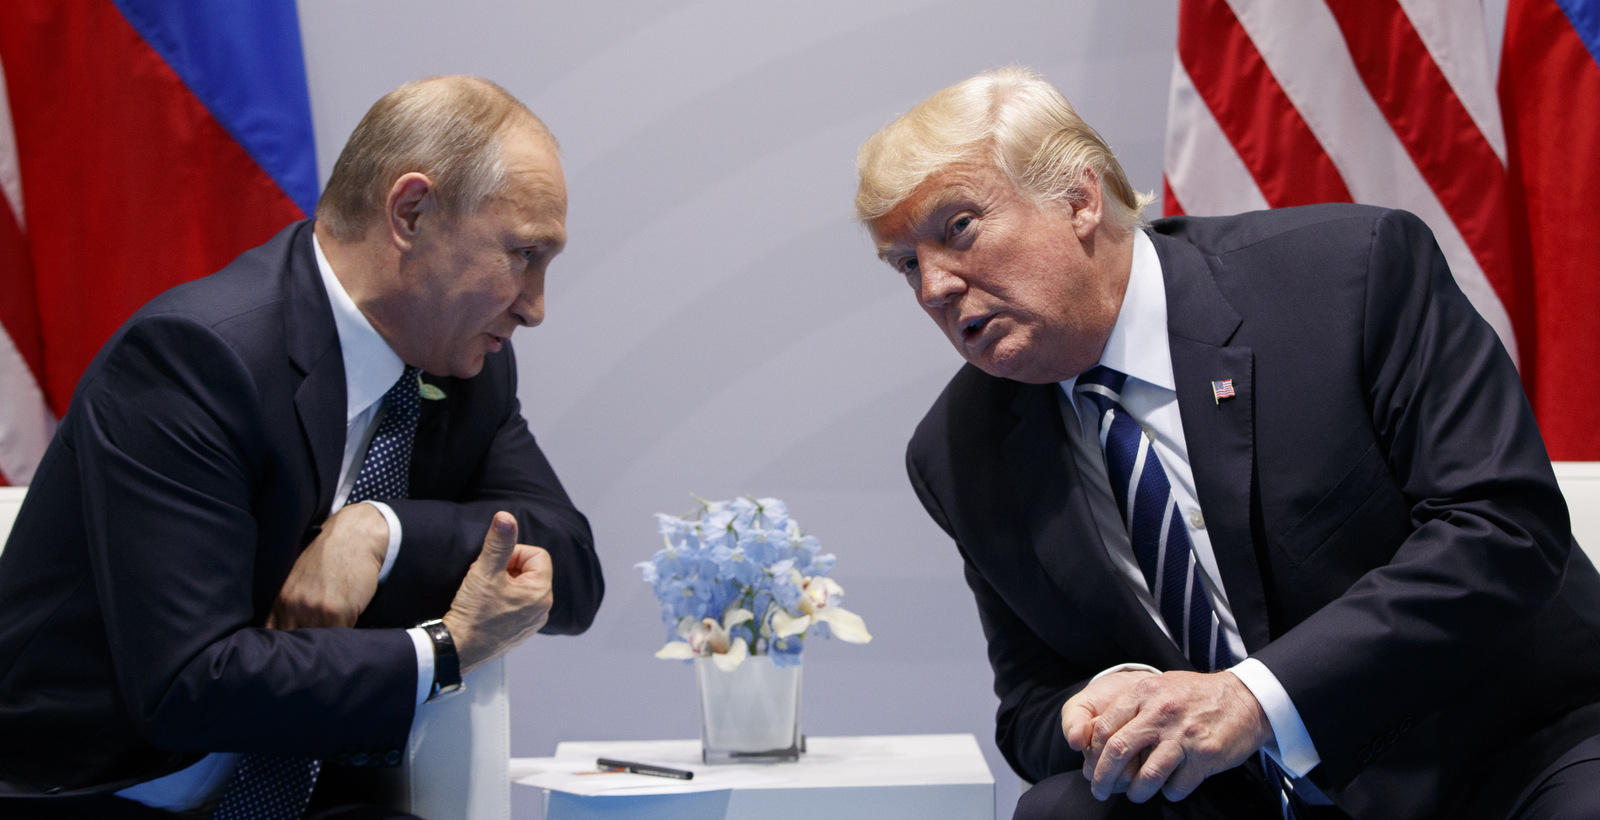 President Donald Trump speaks during a meeting with Russian President Vladimir Putin at the G20 Summit at the G20 Summit, July 7, 2017, in Hamburg. (AP/Evan Vucci)